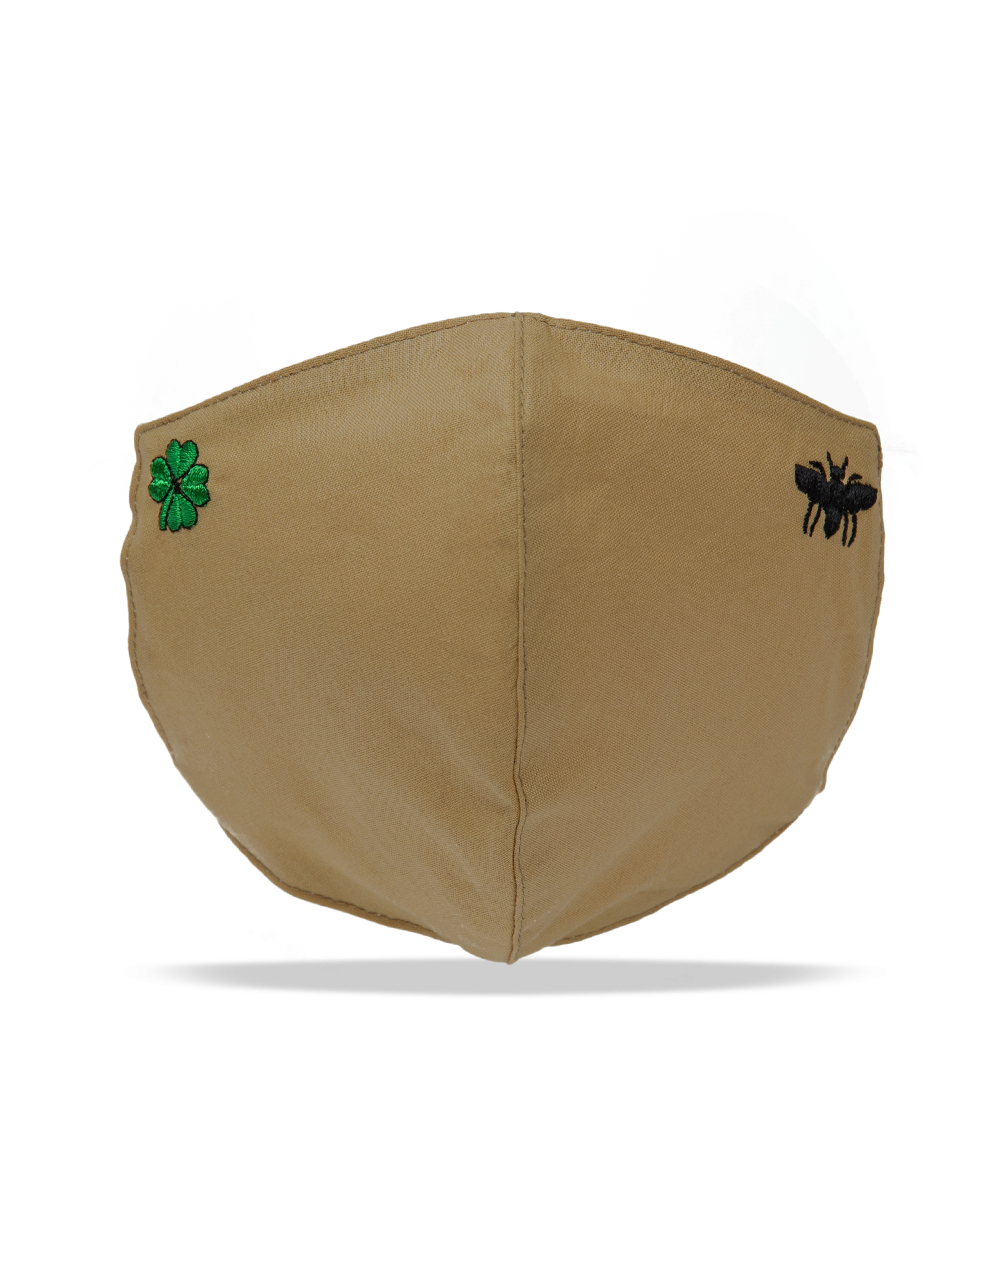 <p>Reusable mask cover in 100% cotton with embroidery.</p>
<ul>
<li><span style="font-size: 8pt;">Cover Mask</span></li>
<li><span style="font-size: 8pt;">Comfortable and enveloping, it adapts to the face</span></li>
<li><span style="font-size: 8pt;">